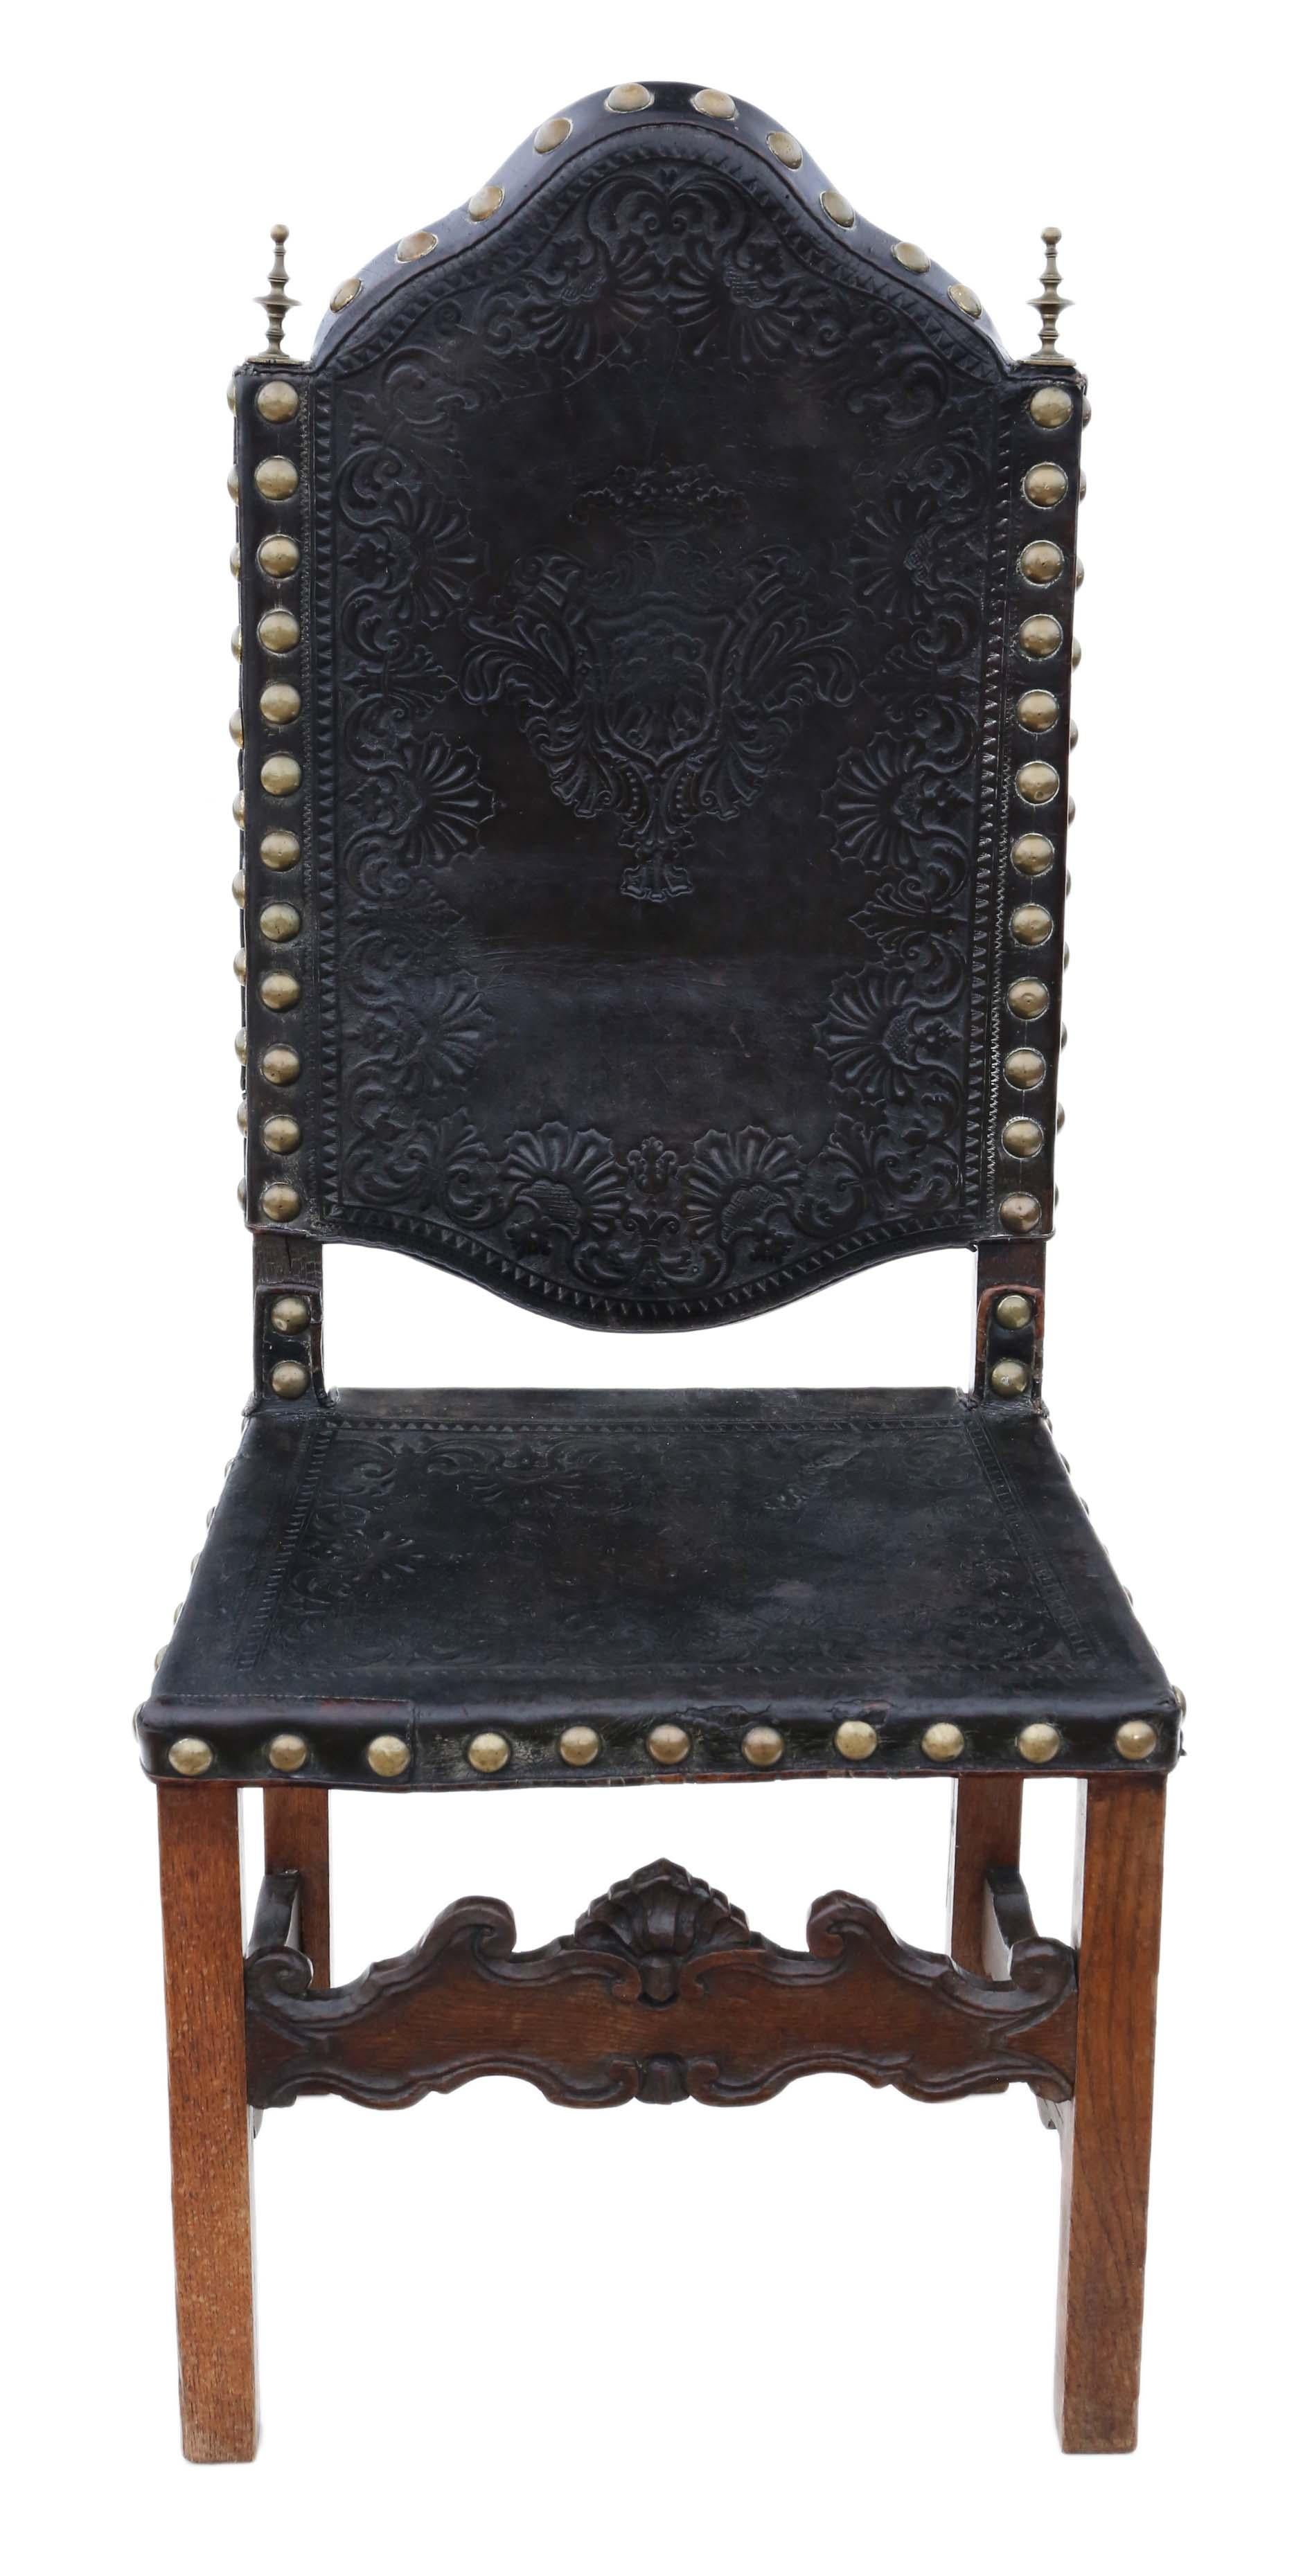 Antique fine quality early 18th century Portuguese oak and leather chair. Could also be used as a side, hall or desk chair. Exceptional age, character and charm.

Very heavy, solid and strong, with no loose joints or woodworm. These are rare and